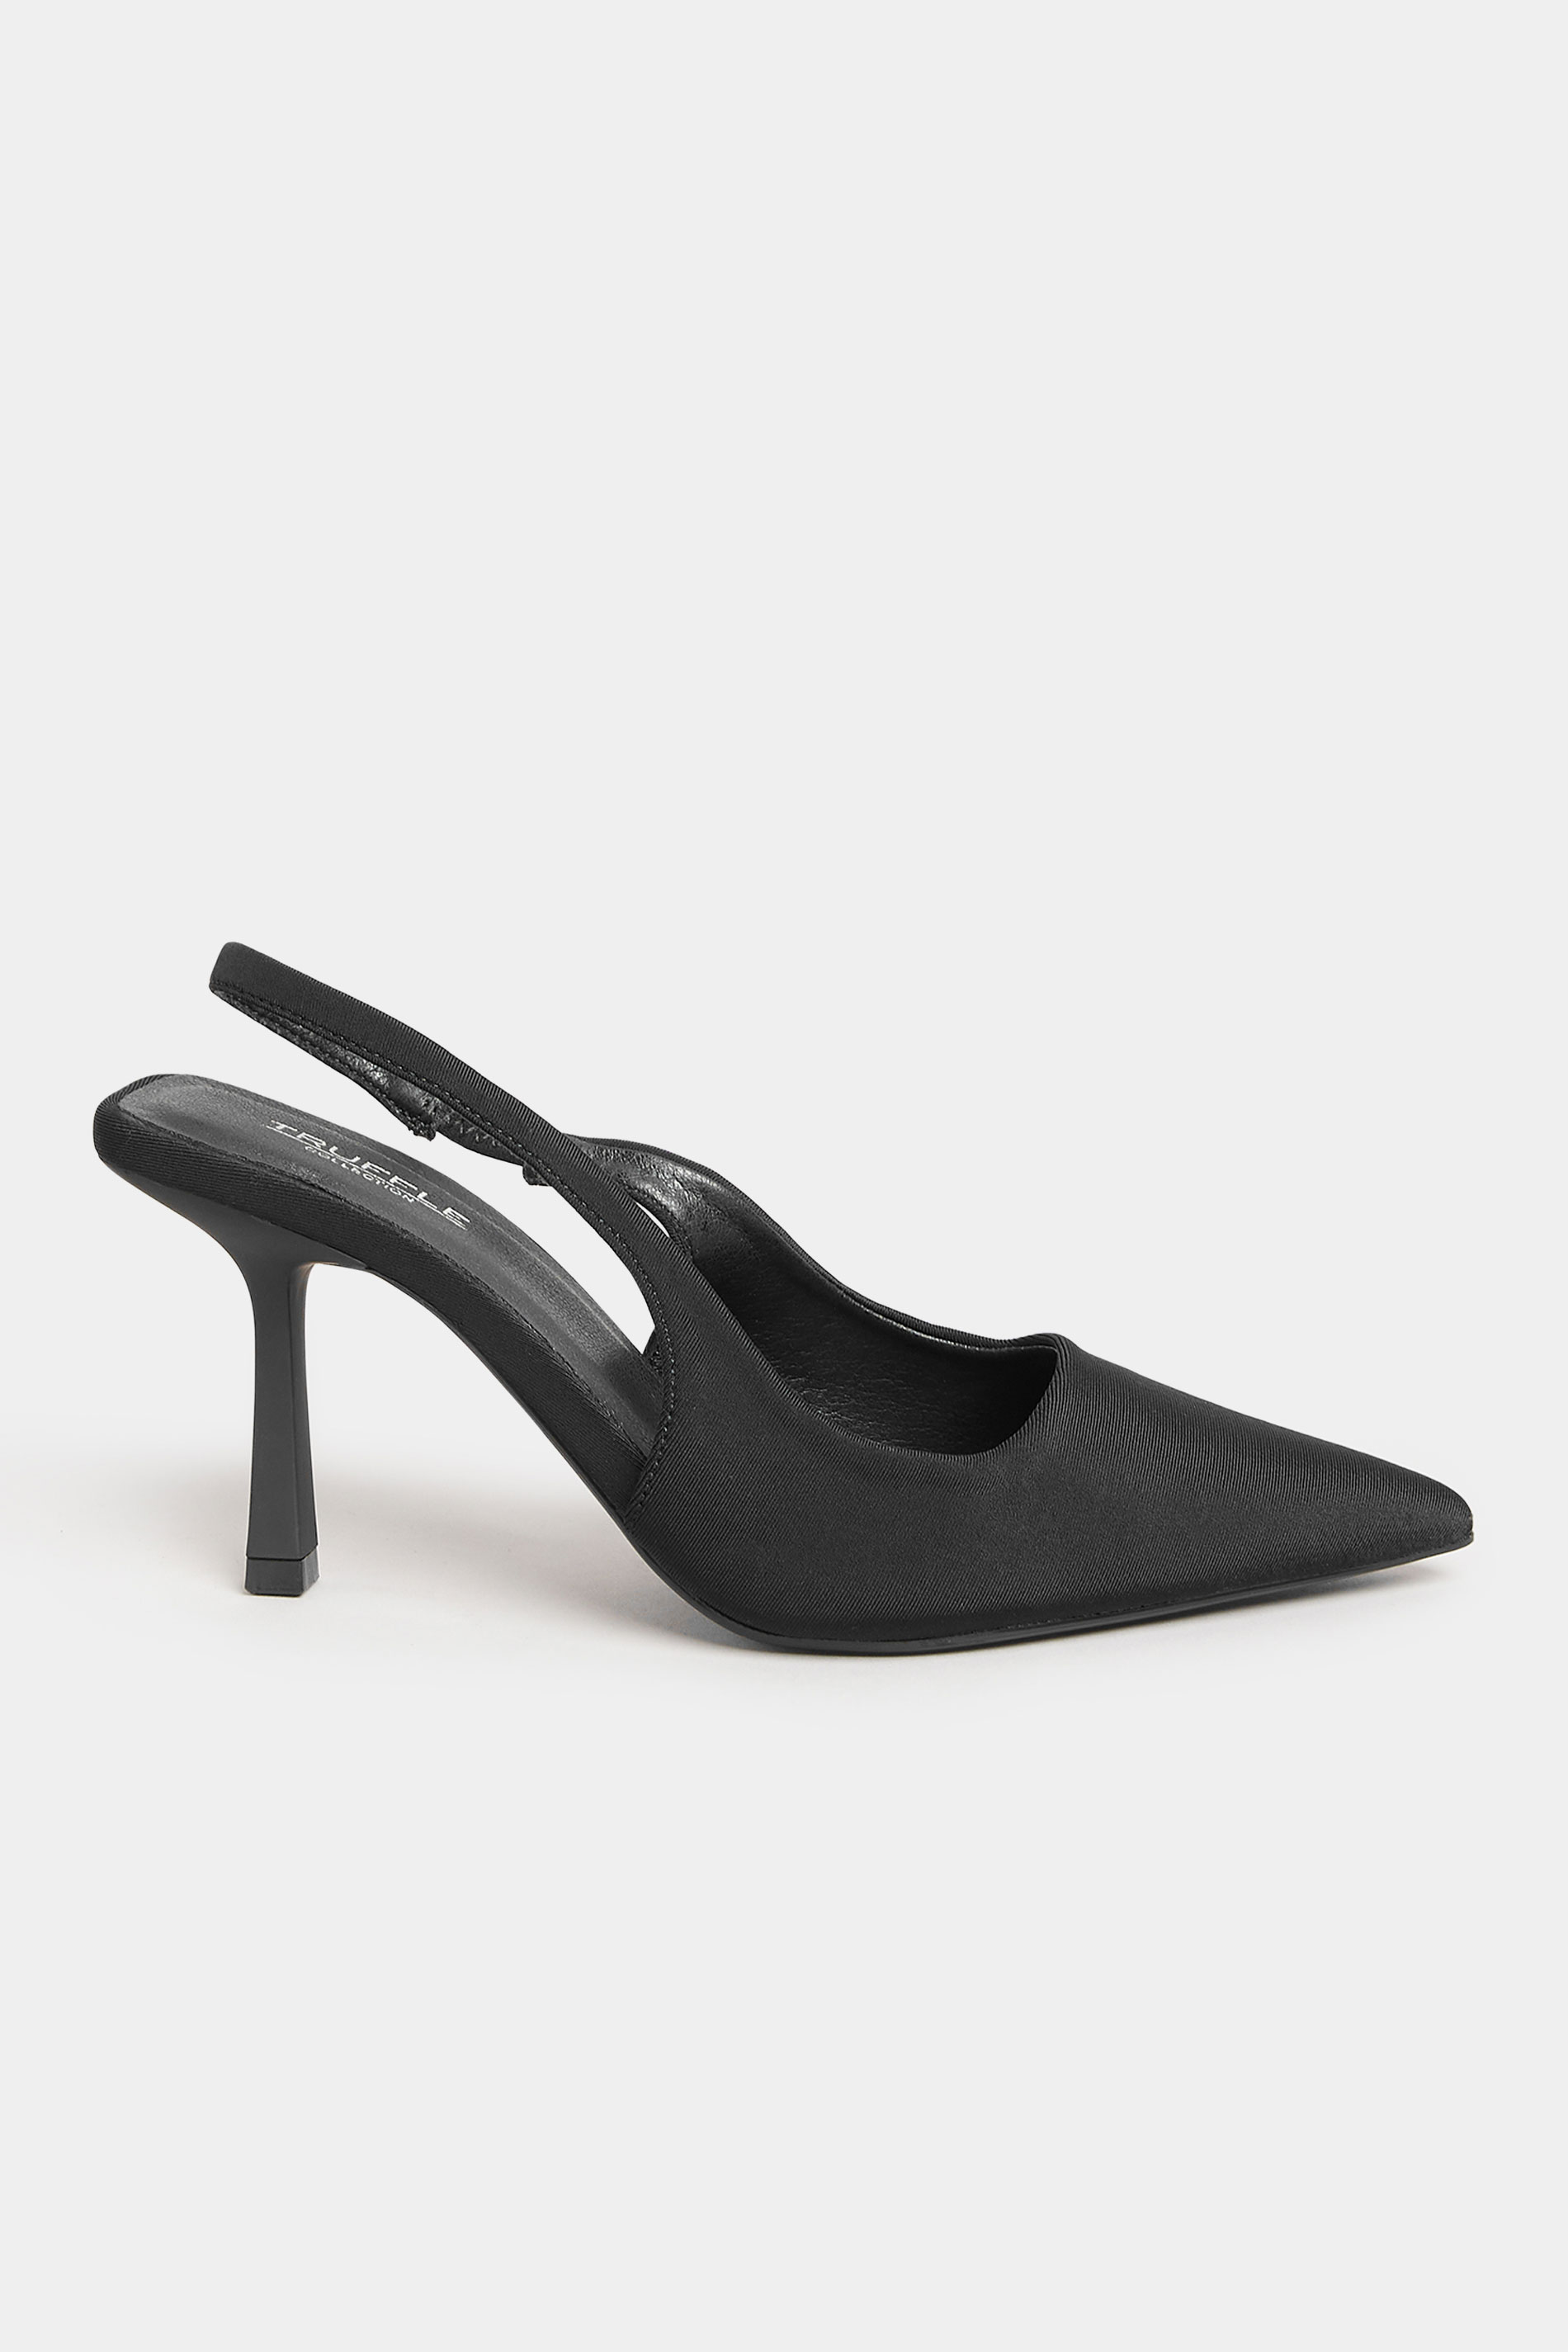 Grande taille  Shoes Grande taille  Heels | PixieGirl Black Pointed Toe Slingback Court Shoes In Standard D Fit - NU85644